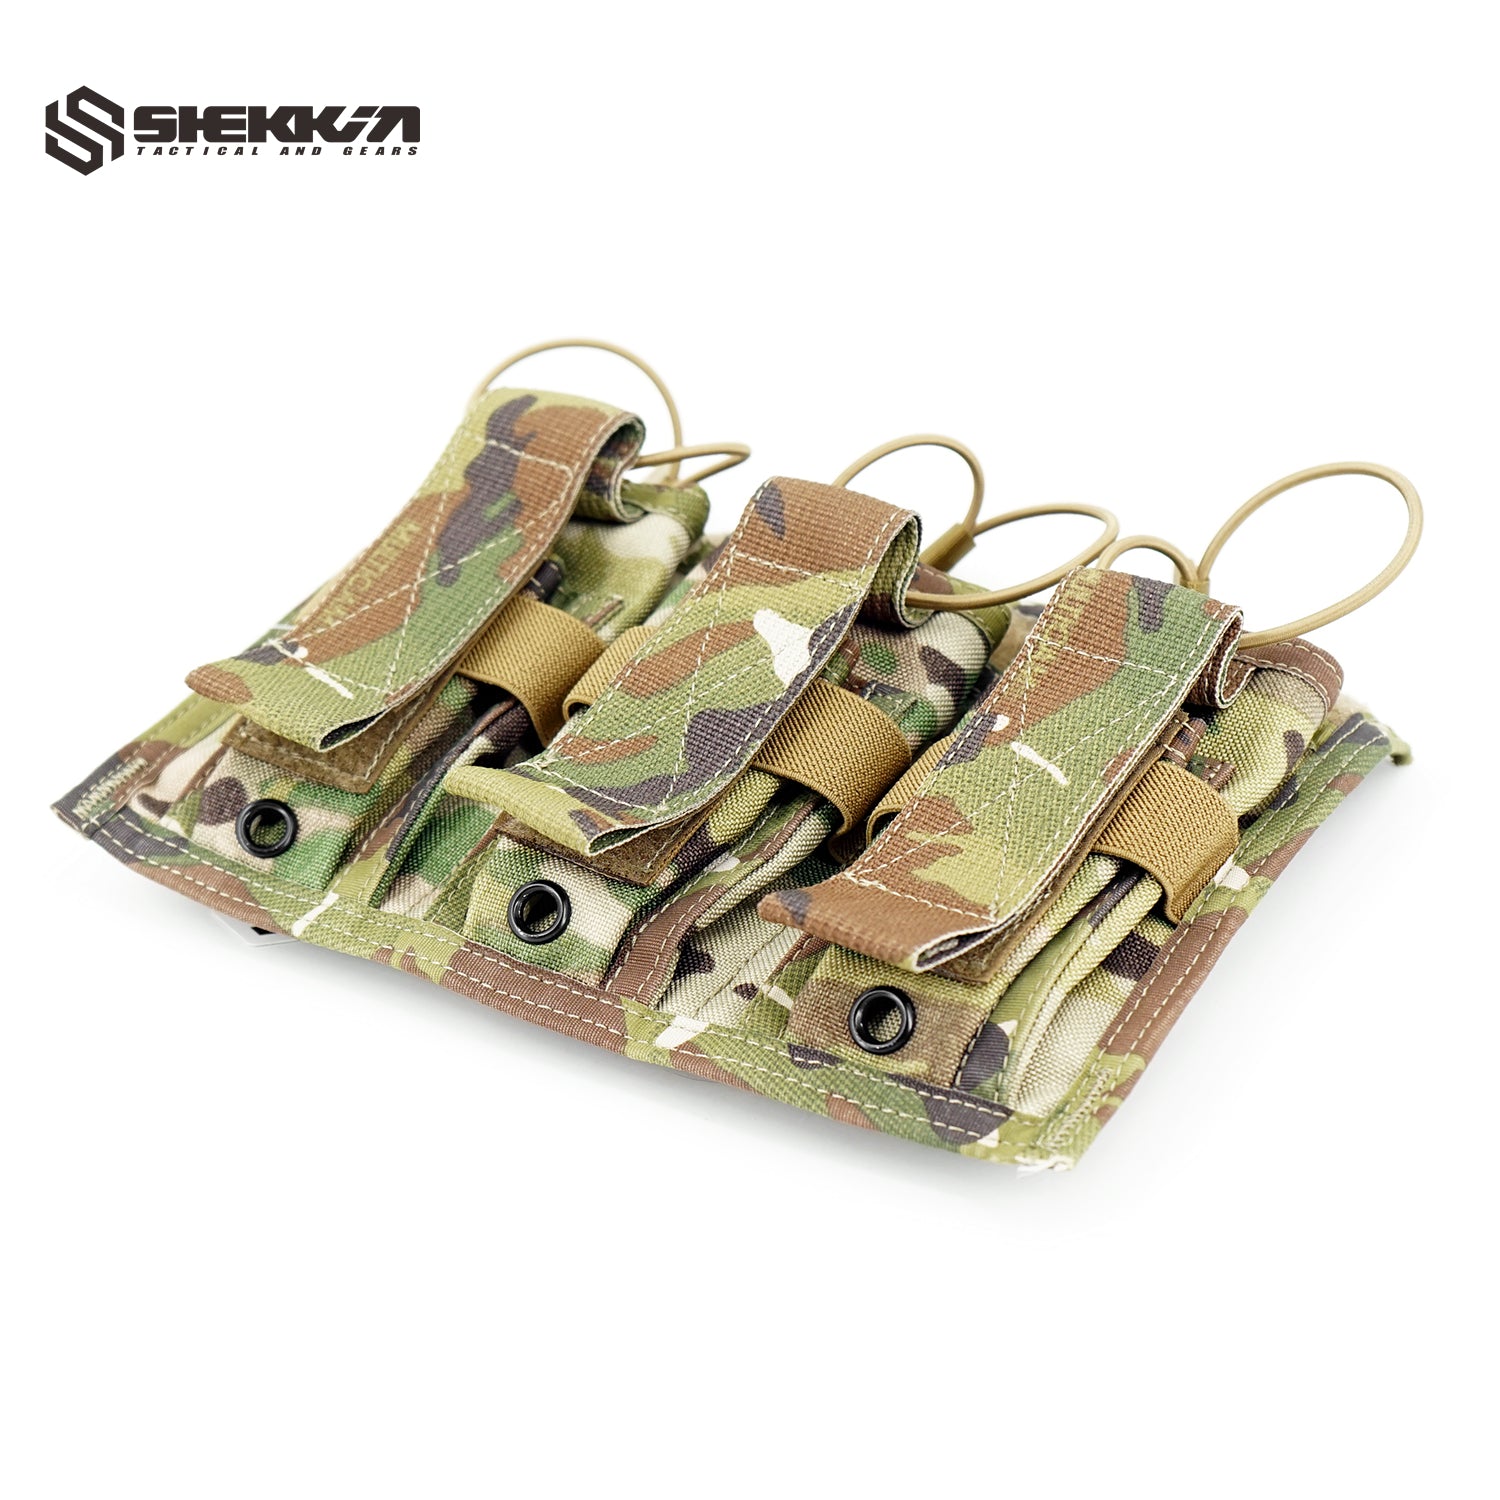 Paraclete ATX style Multicam Tiered Triple Rifle/Pistol Mag Pouch 6 Coloums Molle Straps - Shekkin Gears